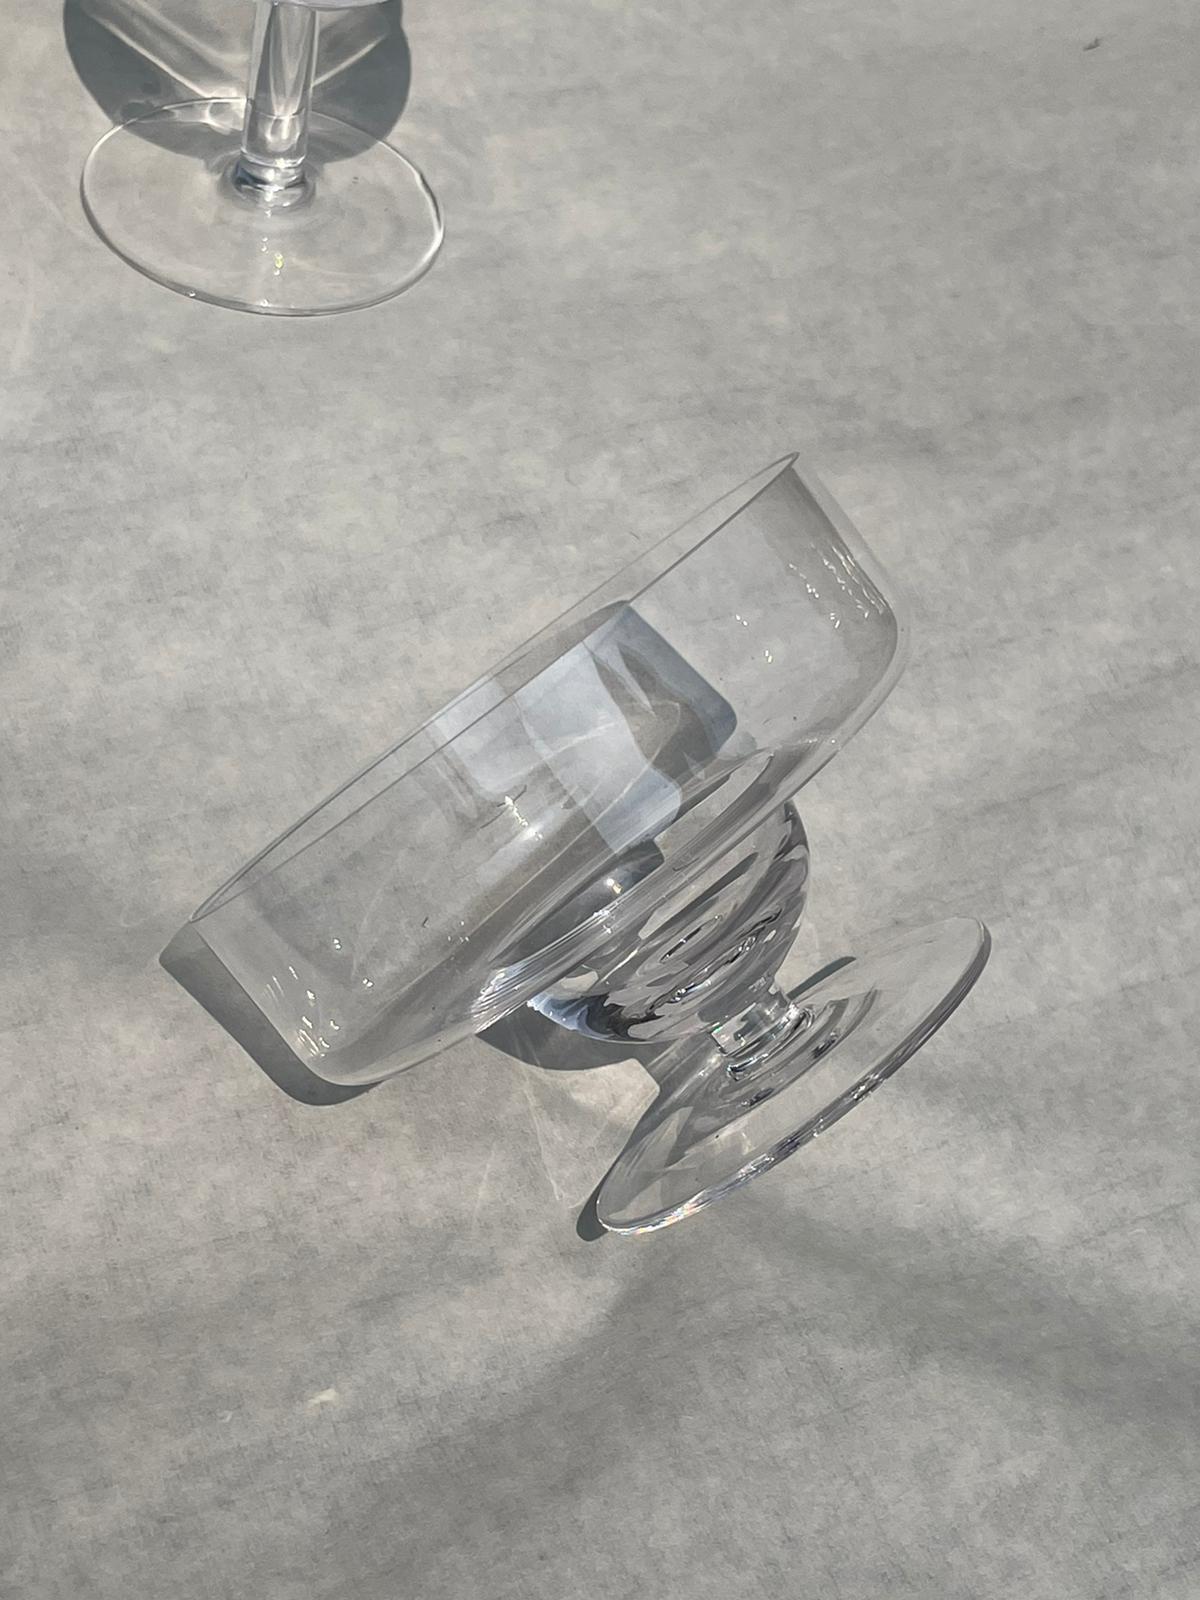 The Contra Dessert Glass by PROSE Tabletop